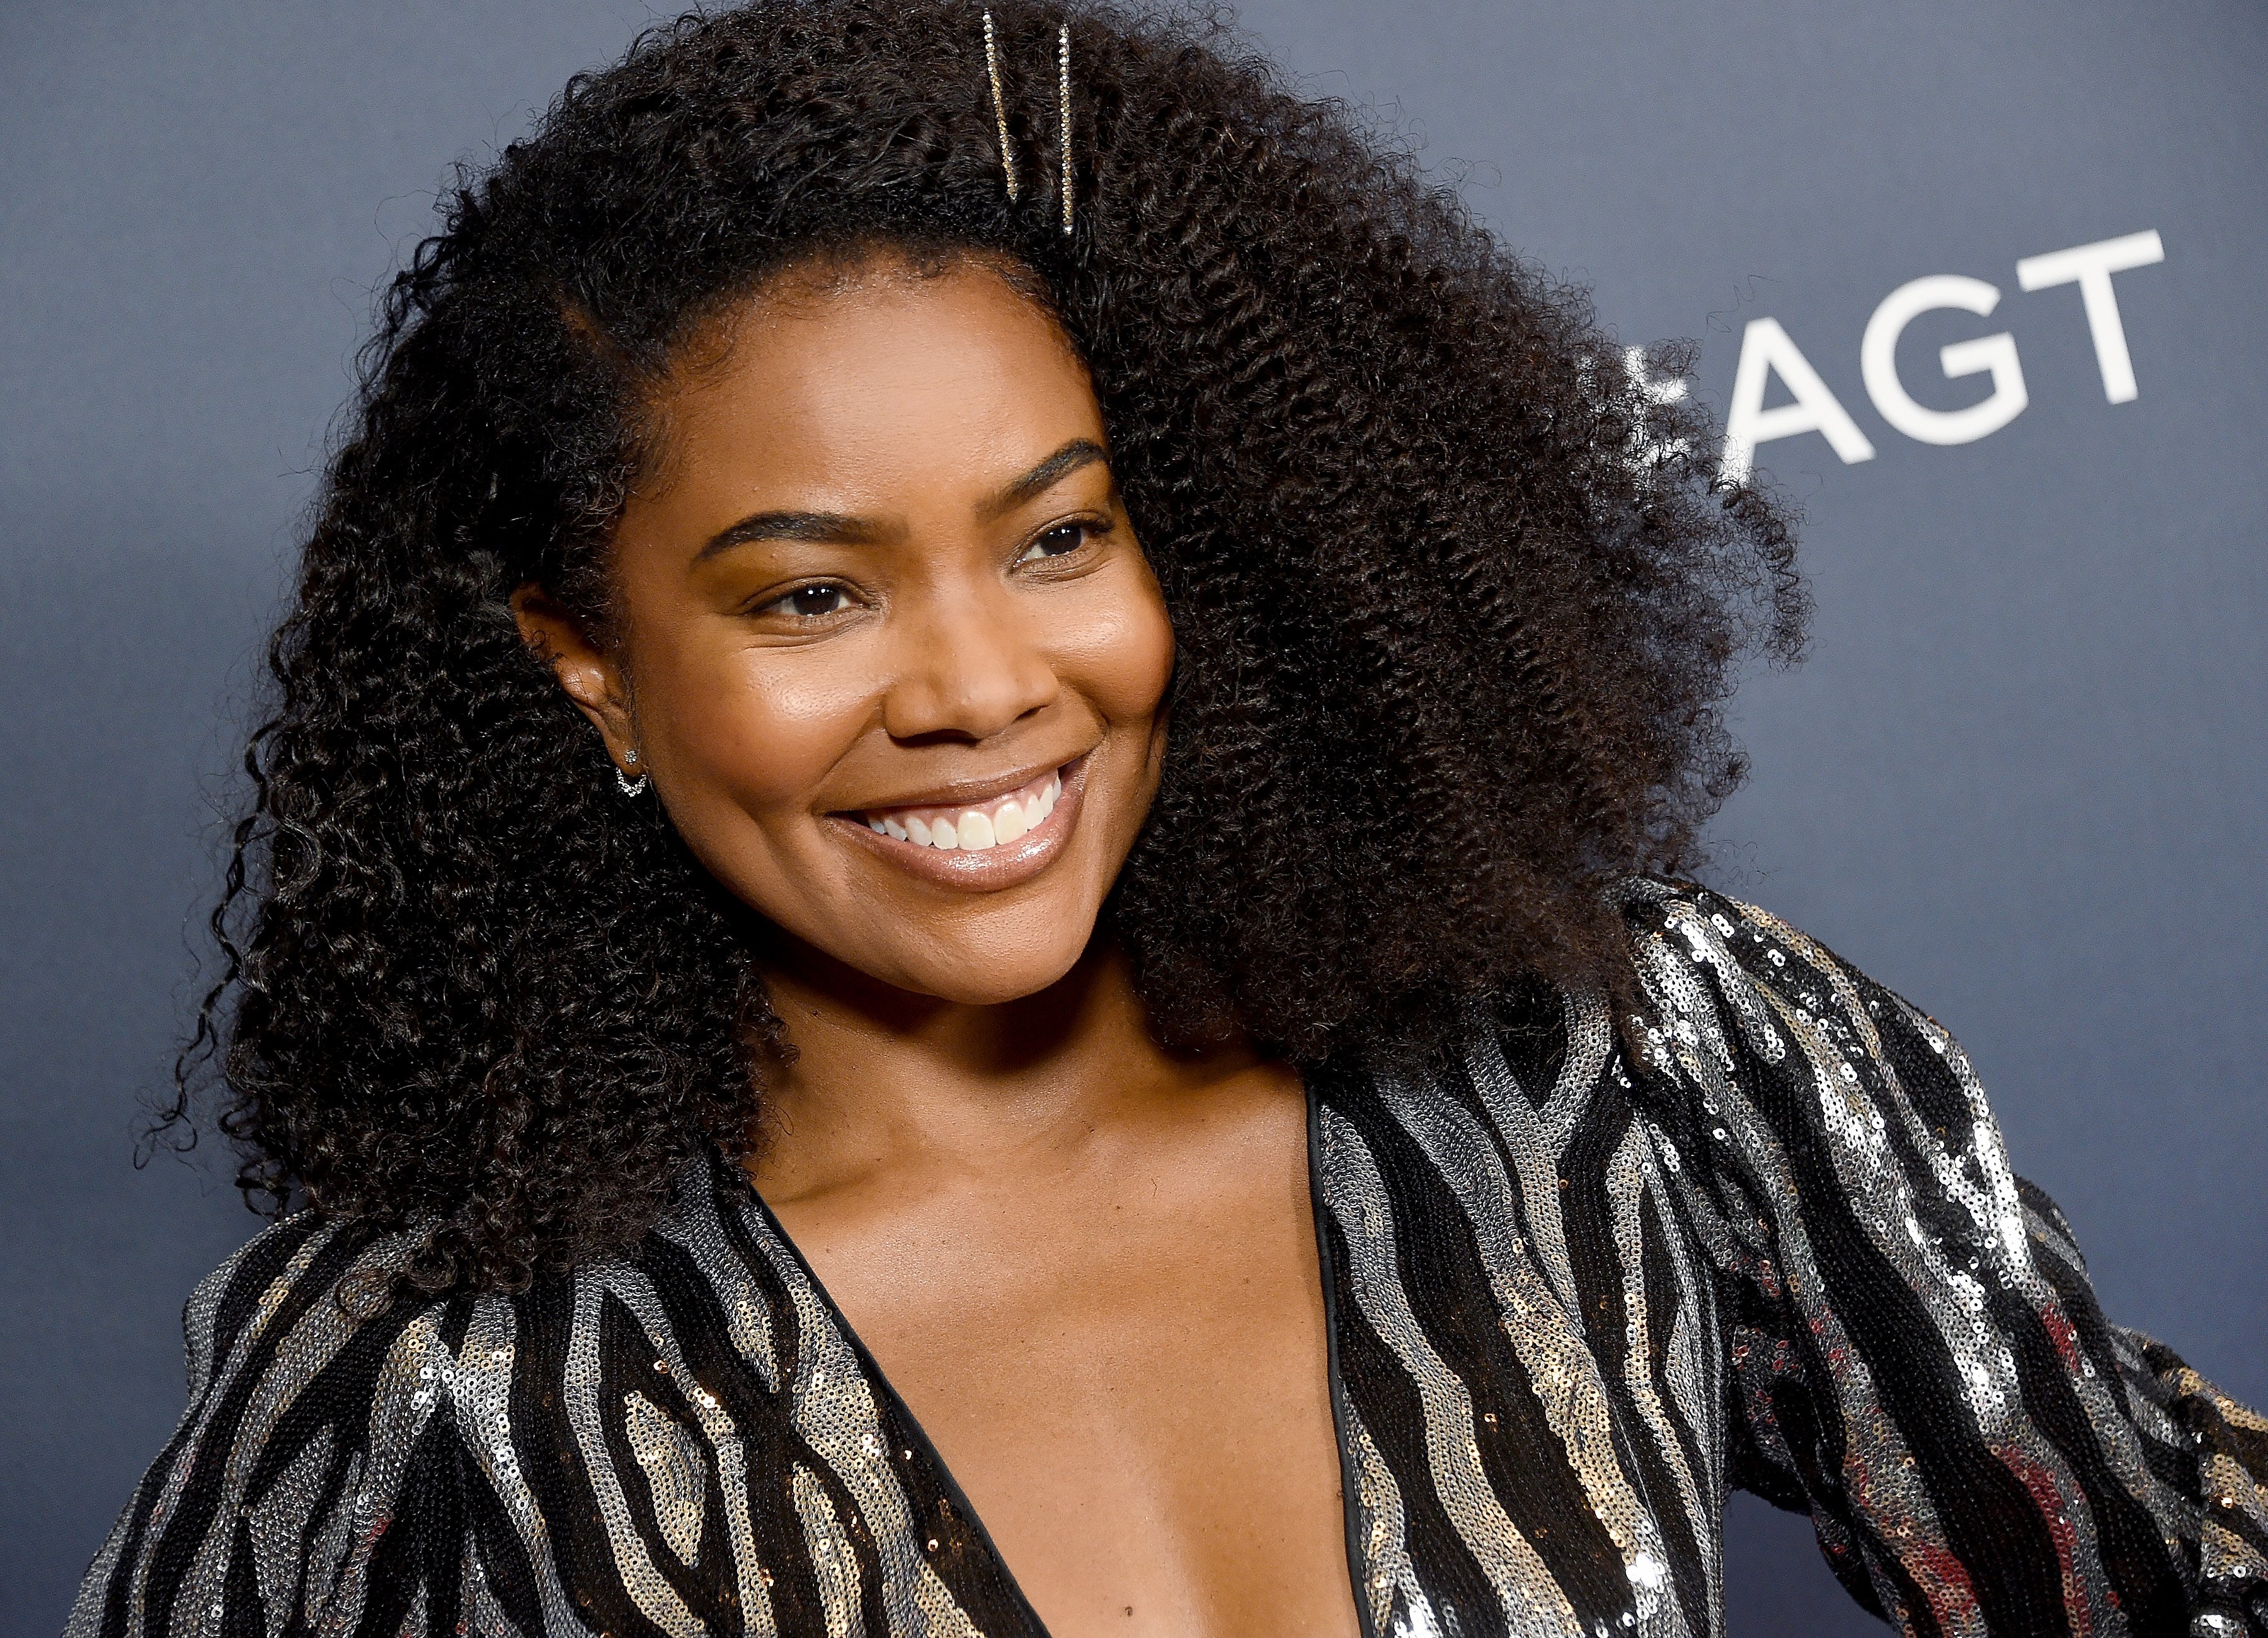 Gabrielle Union at the "America's Got Talent" Season 14 Live Show Red Carpet at Dolby Theatre on September 10, 2019 in Hollywood, California. |Source: Getty Images